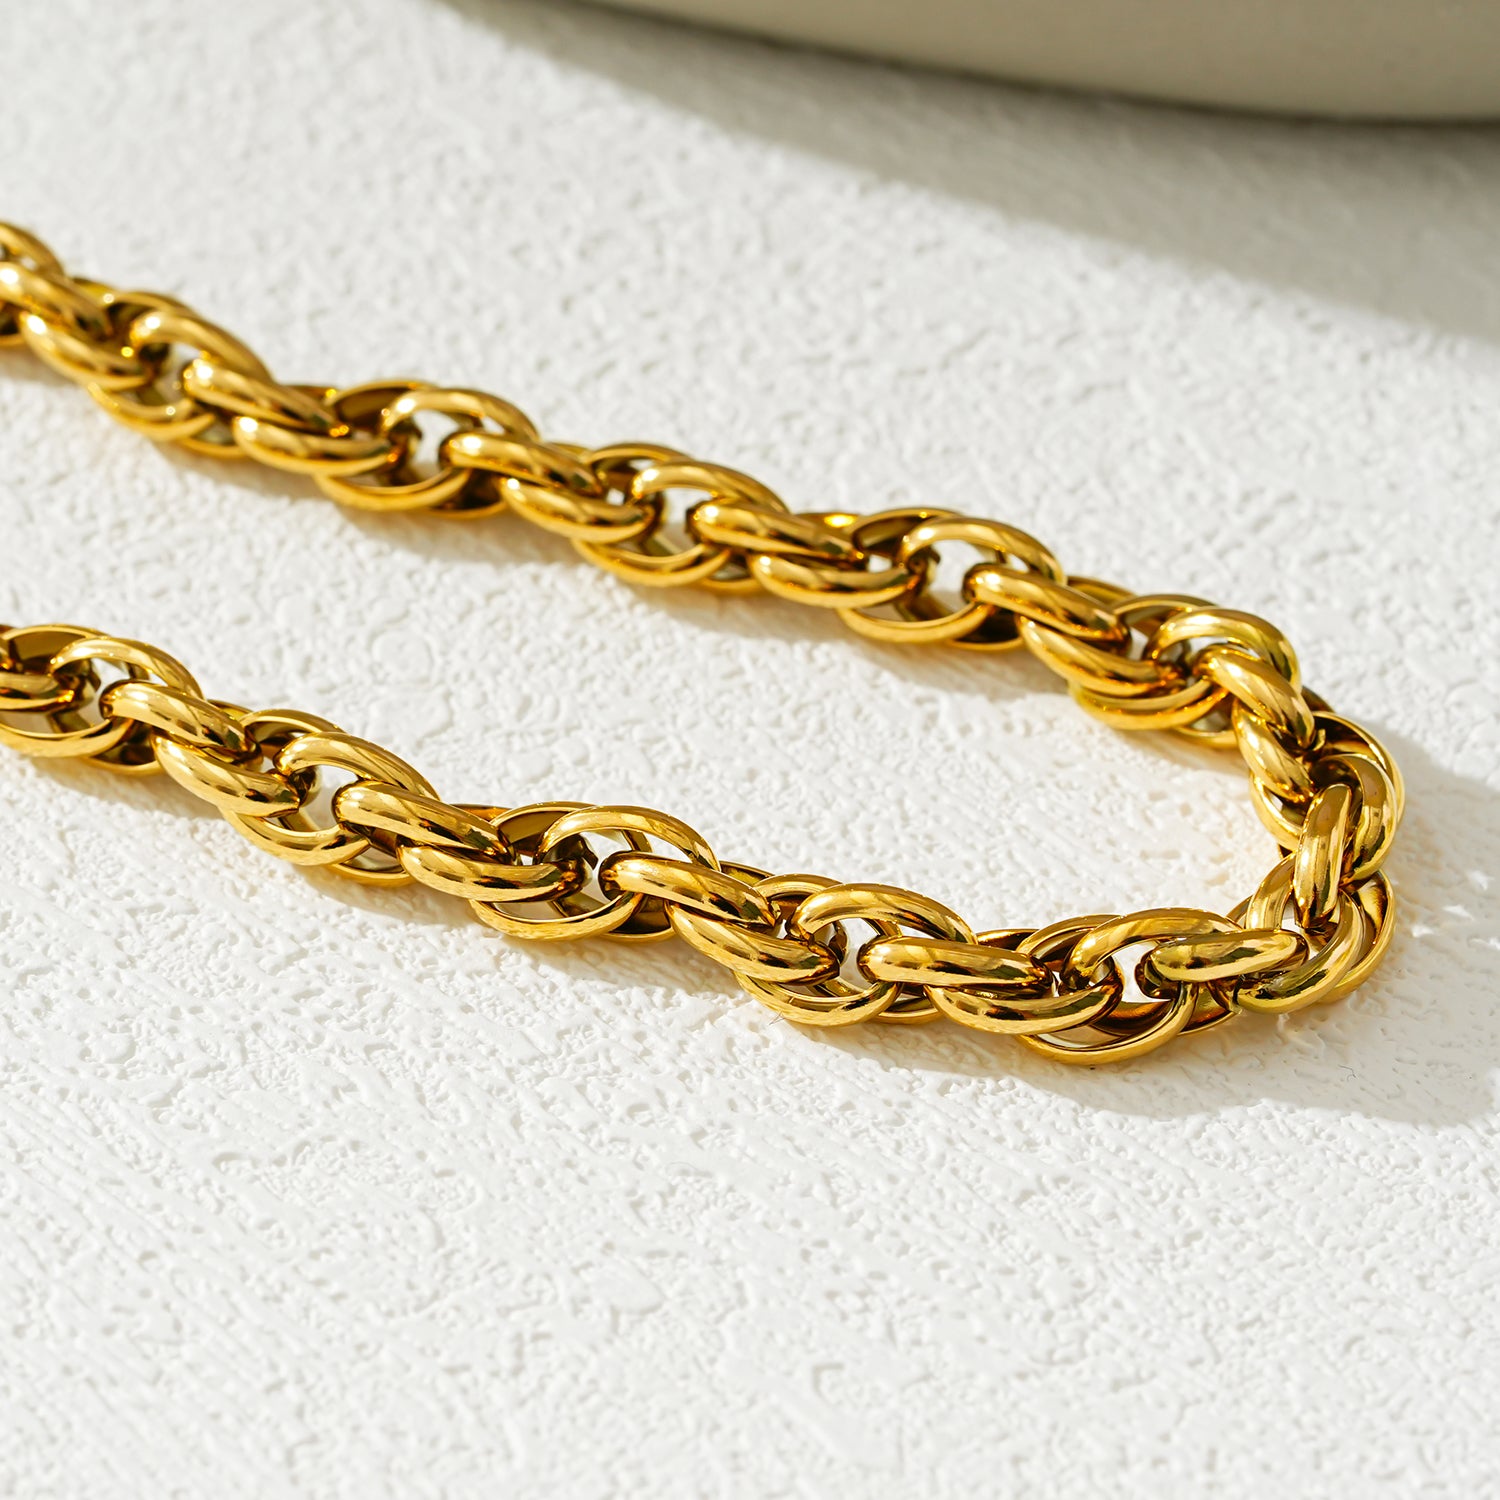 Style ISLINGTON: Chunky Intricate Multi-Link Chain Necklace